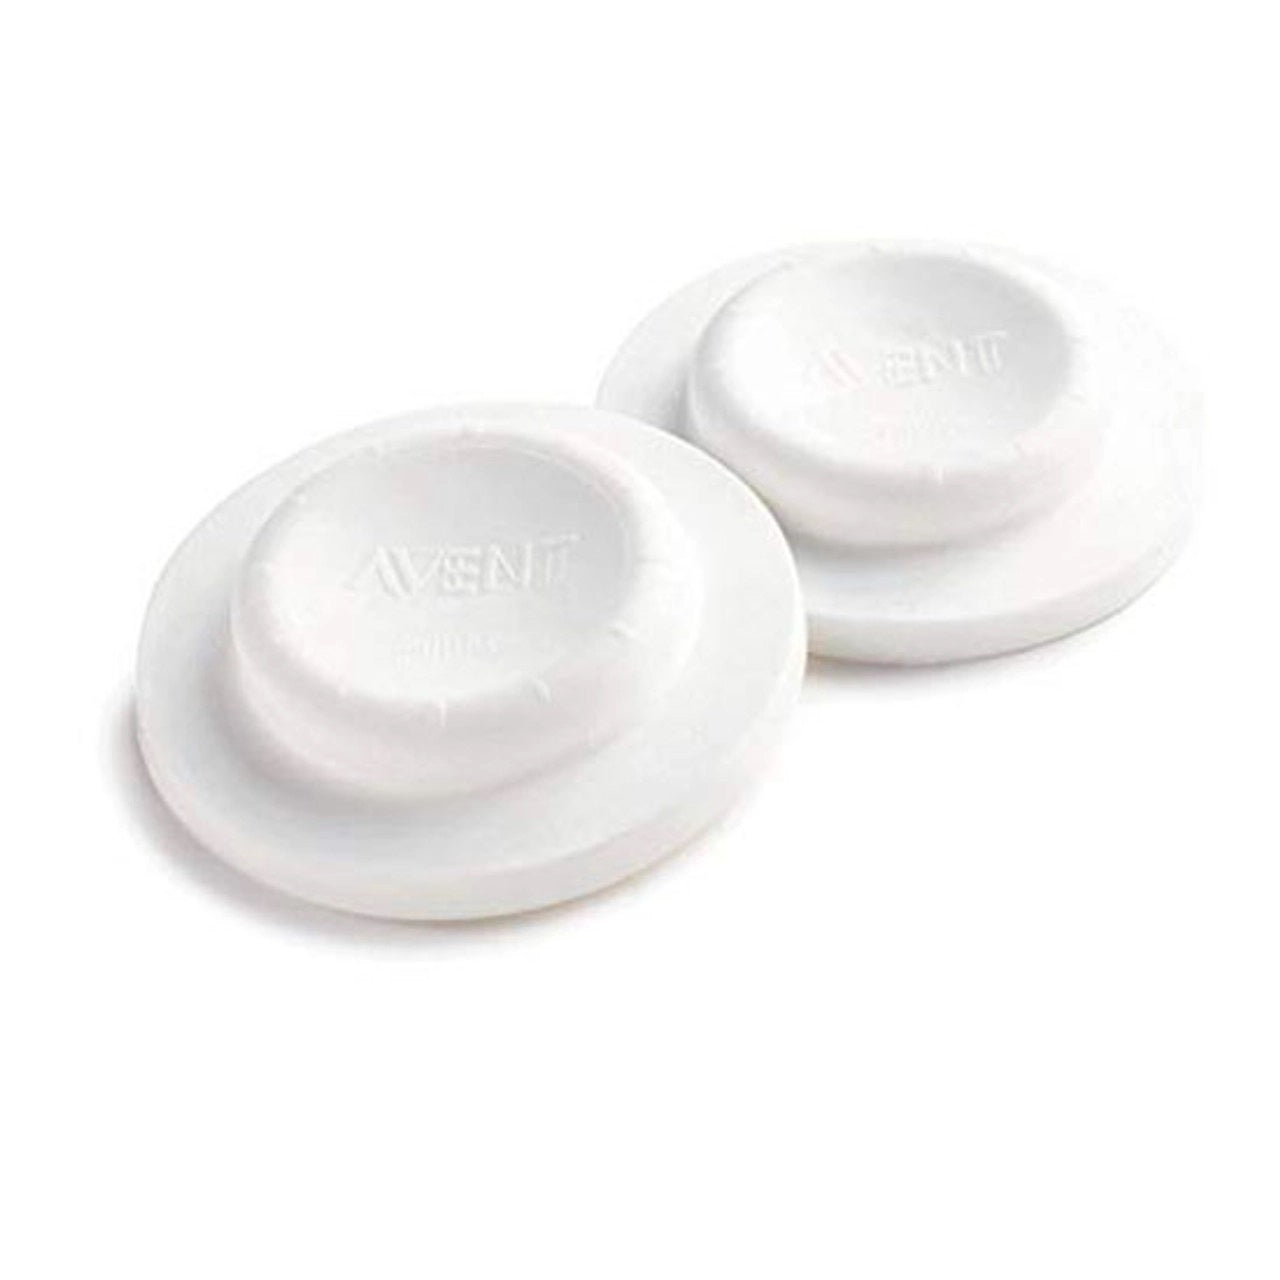 Philips Avent Sealing Discs for Anti-Colic Baby Bottles, 6 Pack